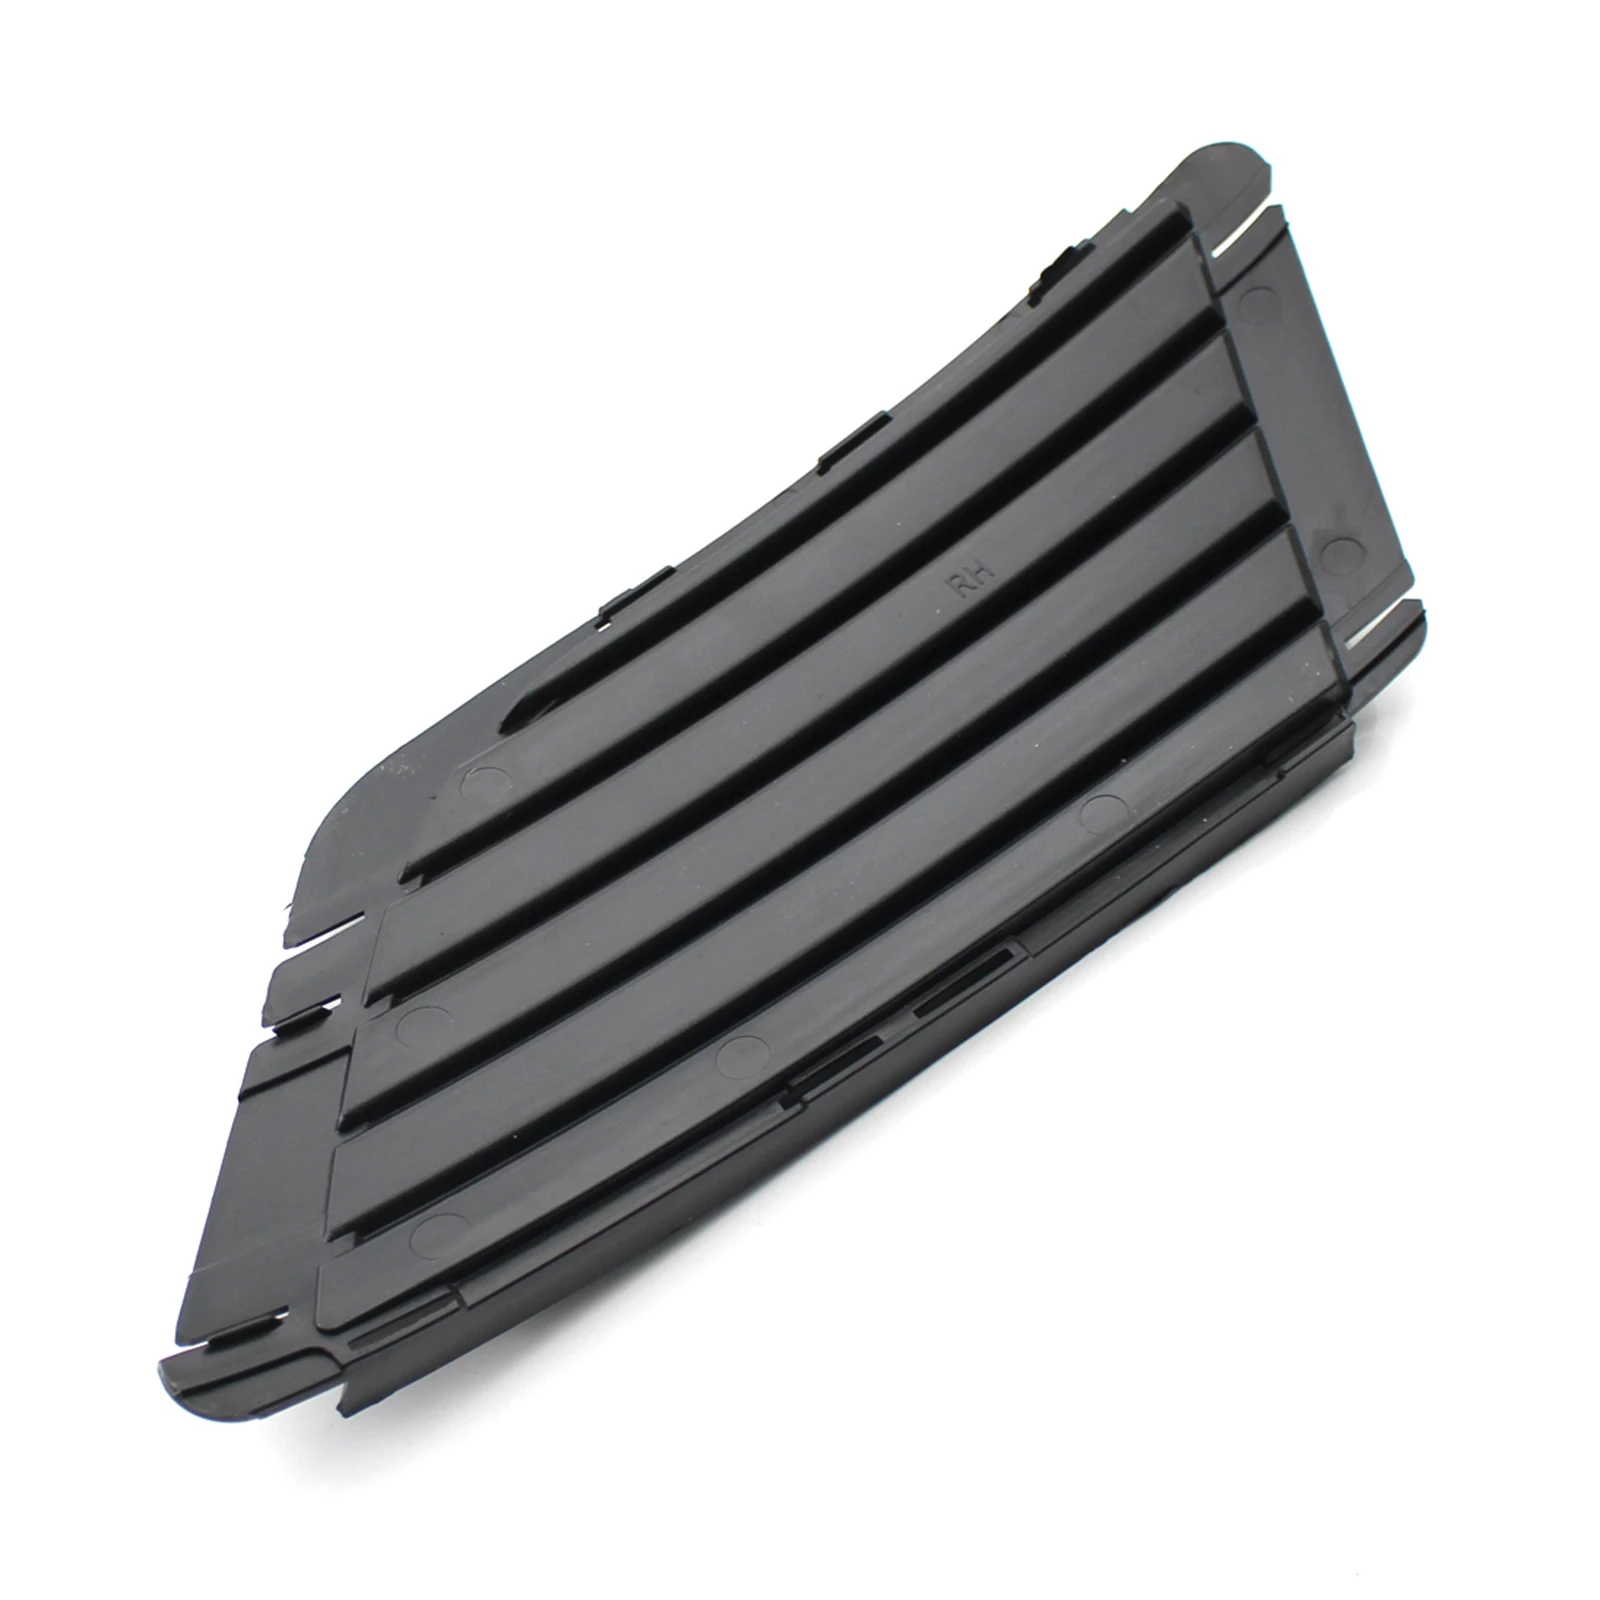  Grille Right Hole Cover for Vauxhall Corsa 3-2006 High Quality